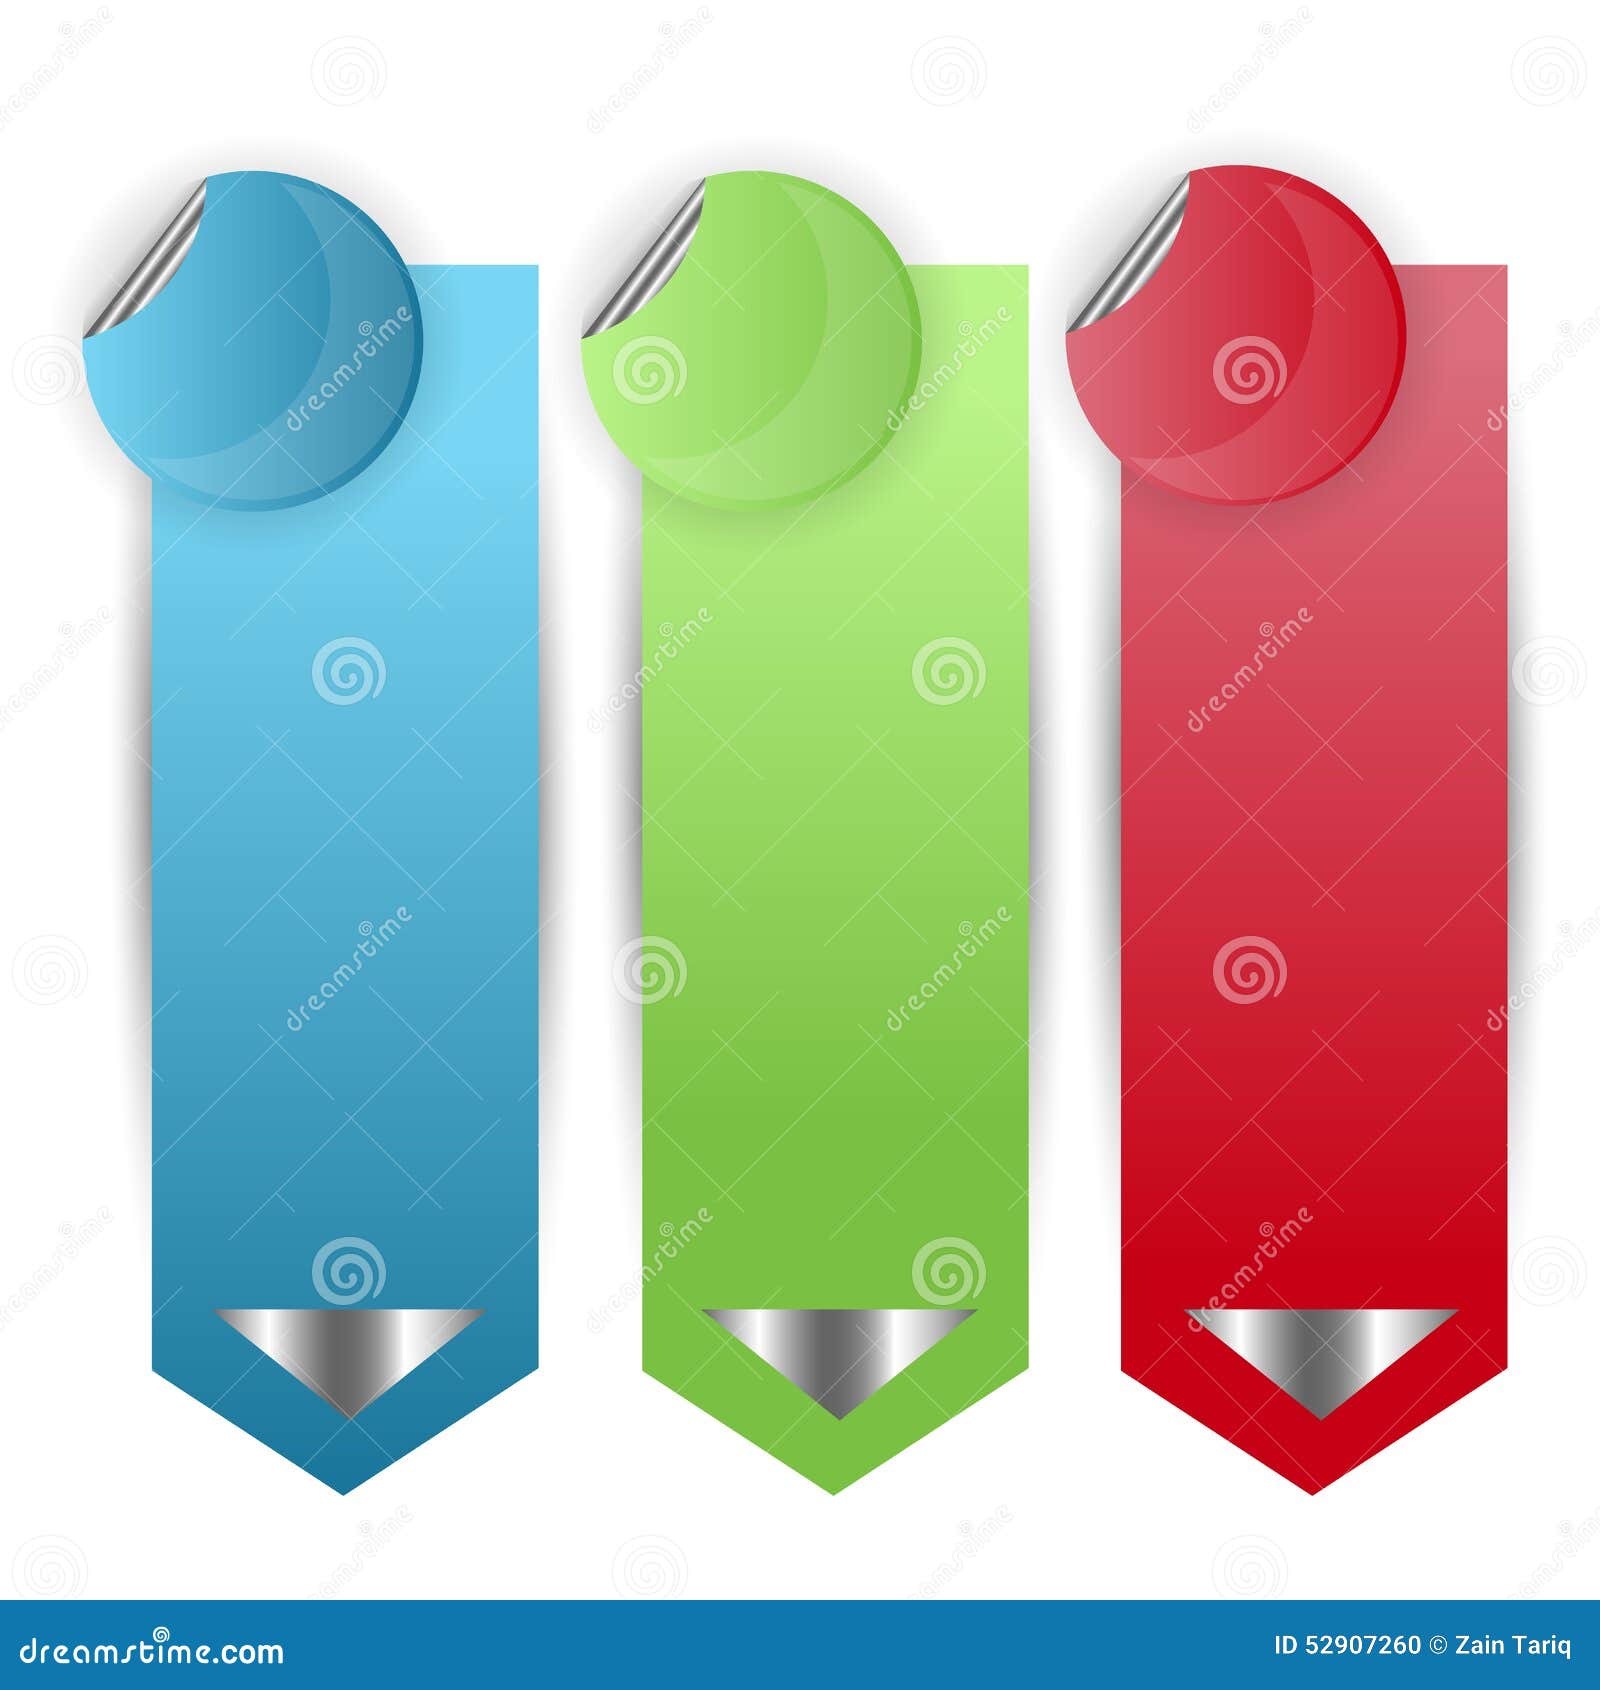 Web arrow banners stock vector. Illustration of discount - 52907260